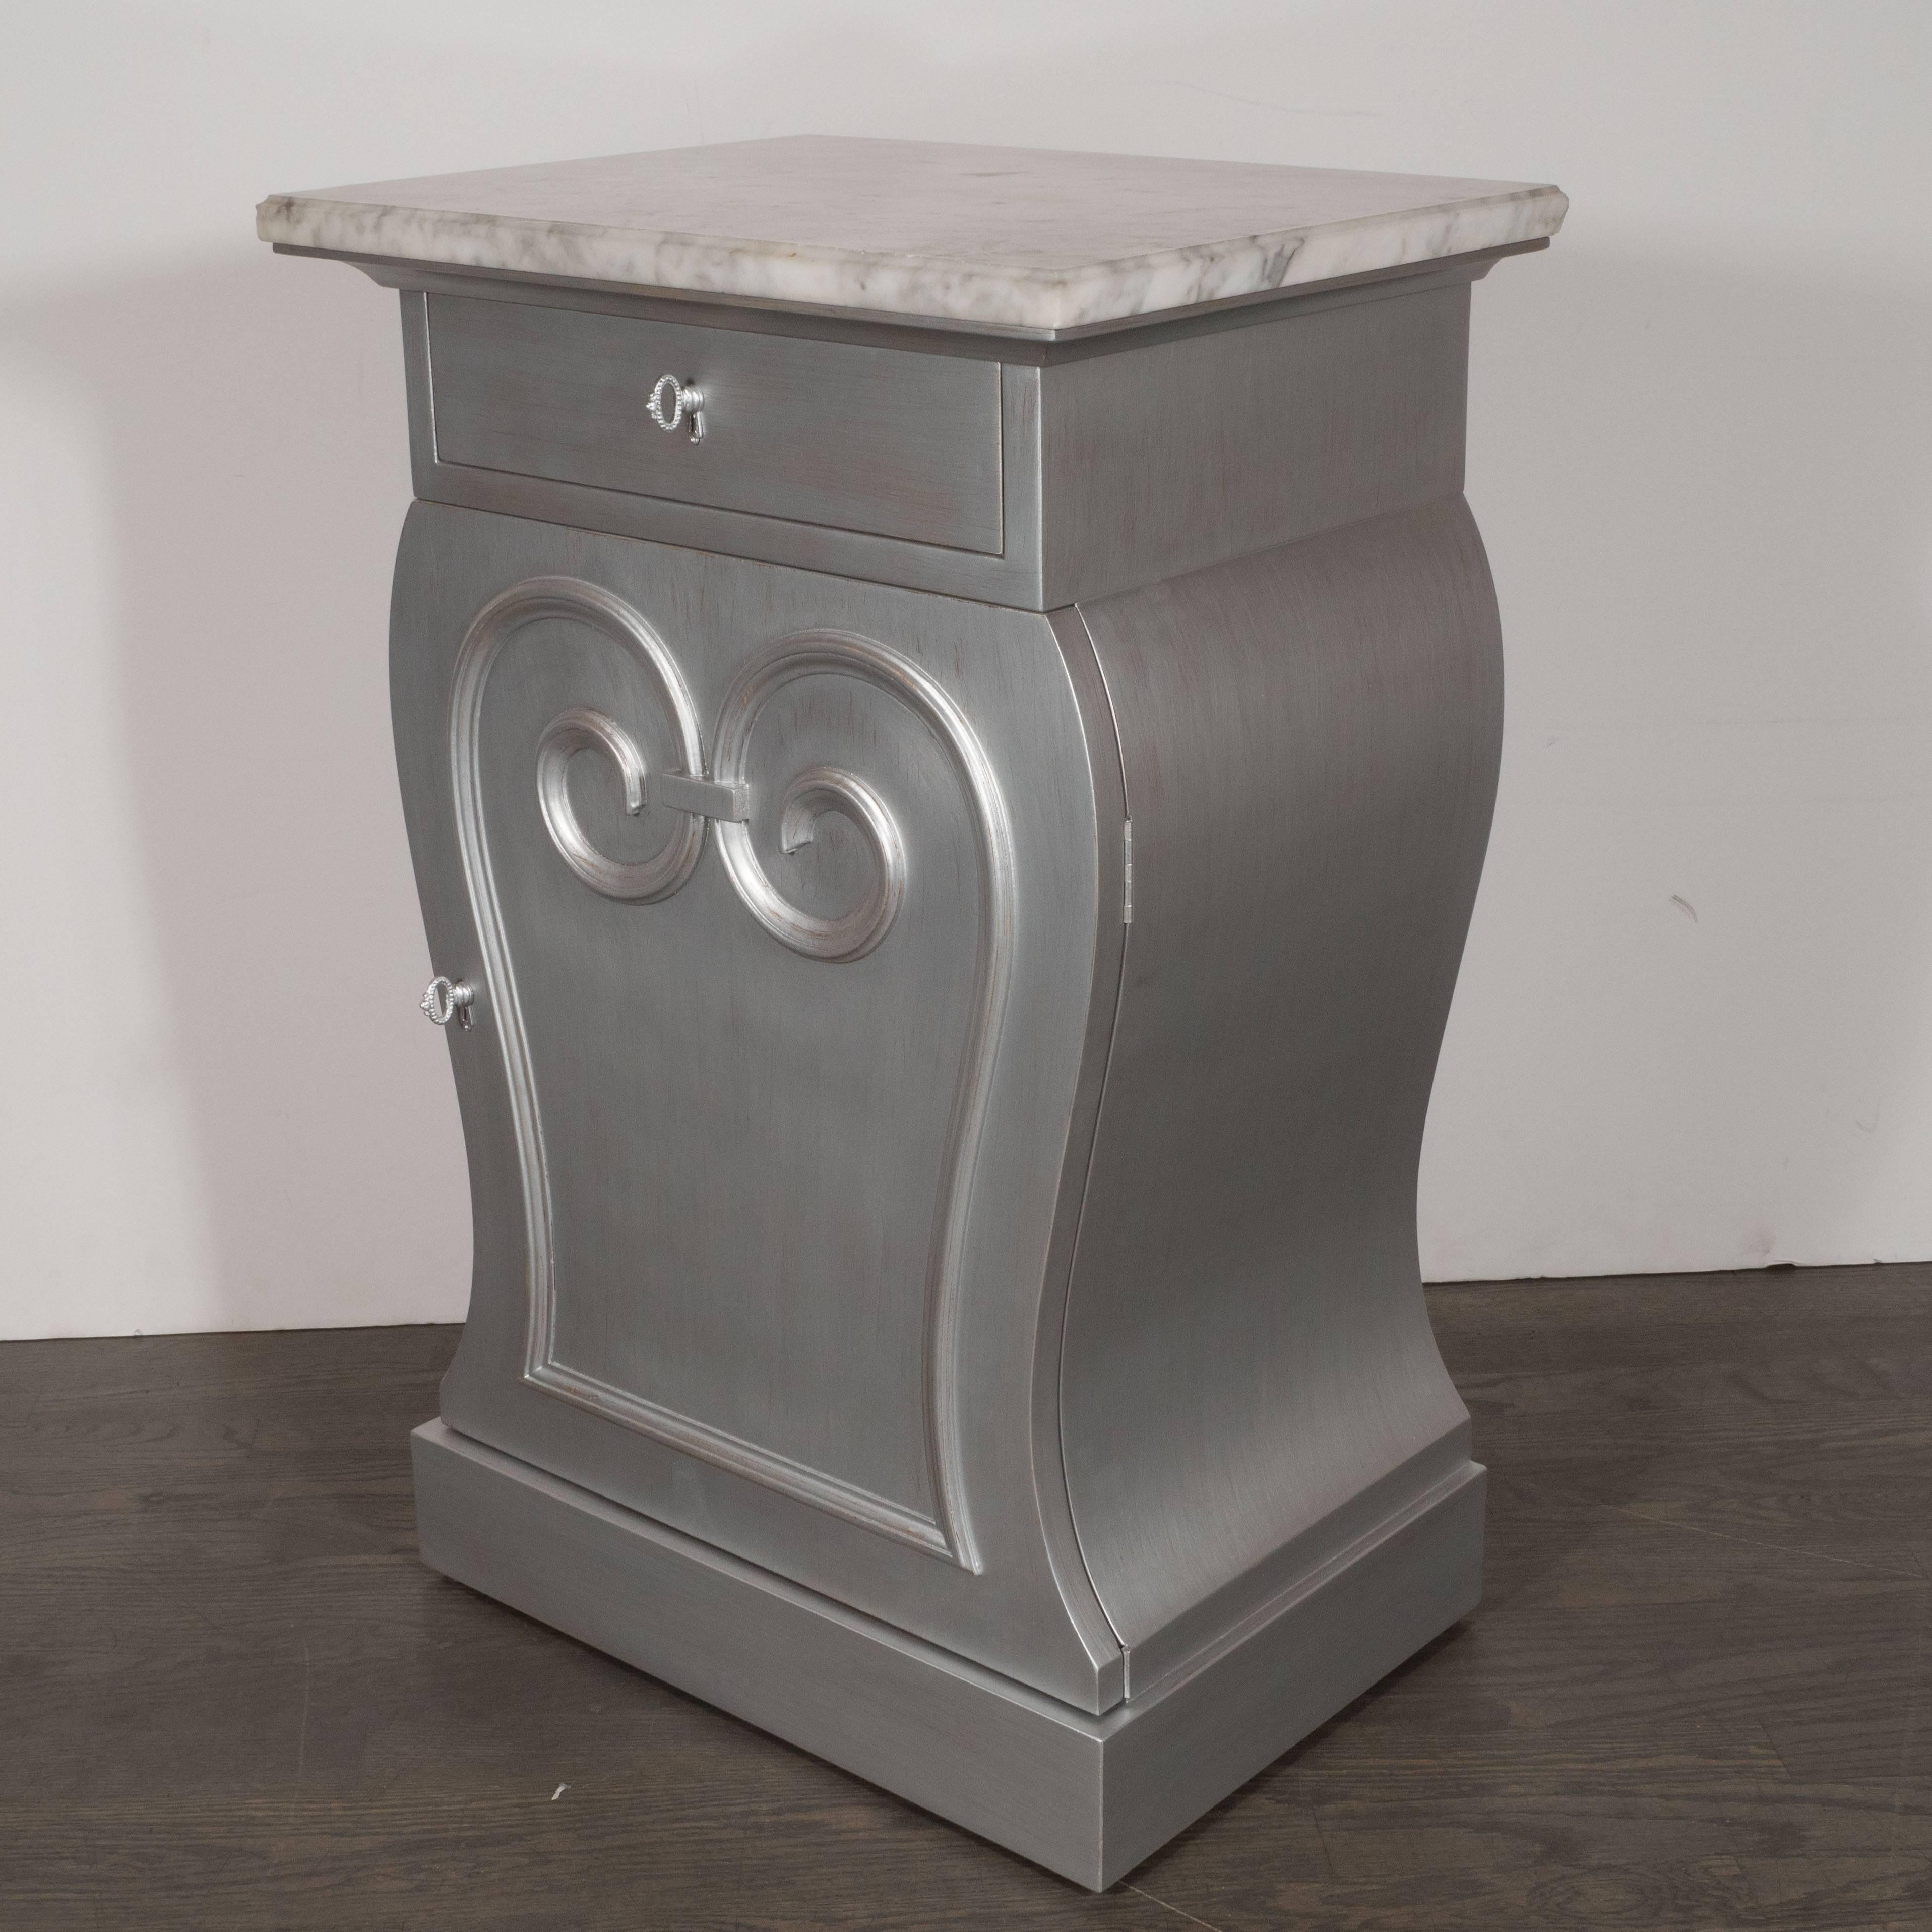 Art Deco Pair of Deco End Tables in Silverleaf with Carrara Marble Tops by Grosfeld House